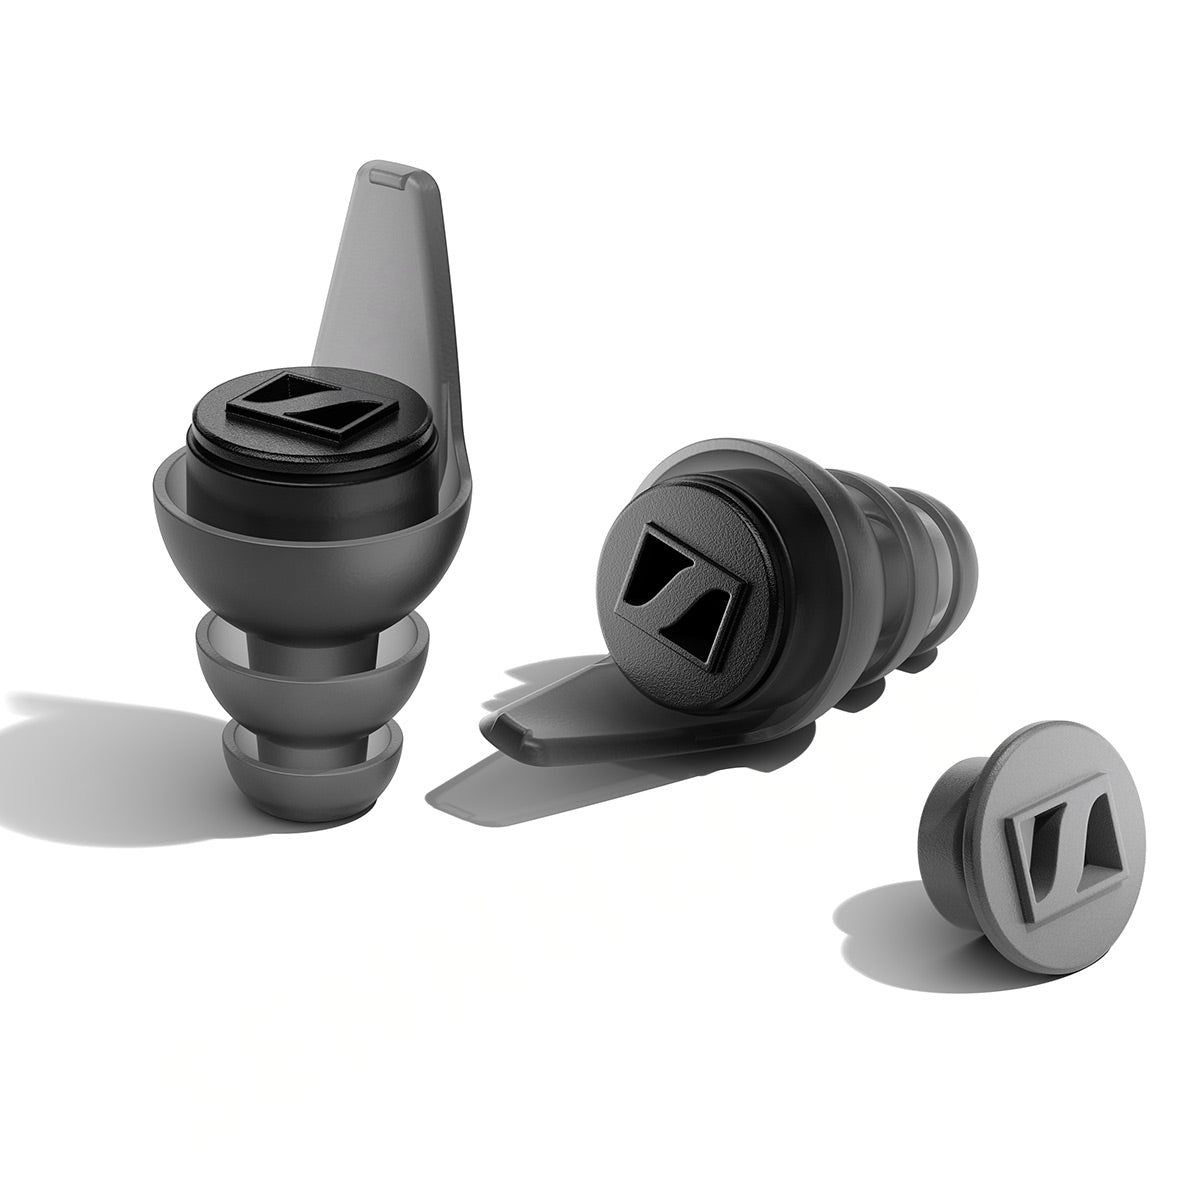 Sennheiser SoundProtex Plus Hearing Protection Earplugs with 3 Acoustic Filters